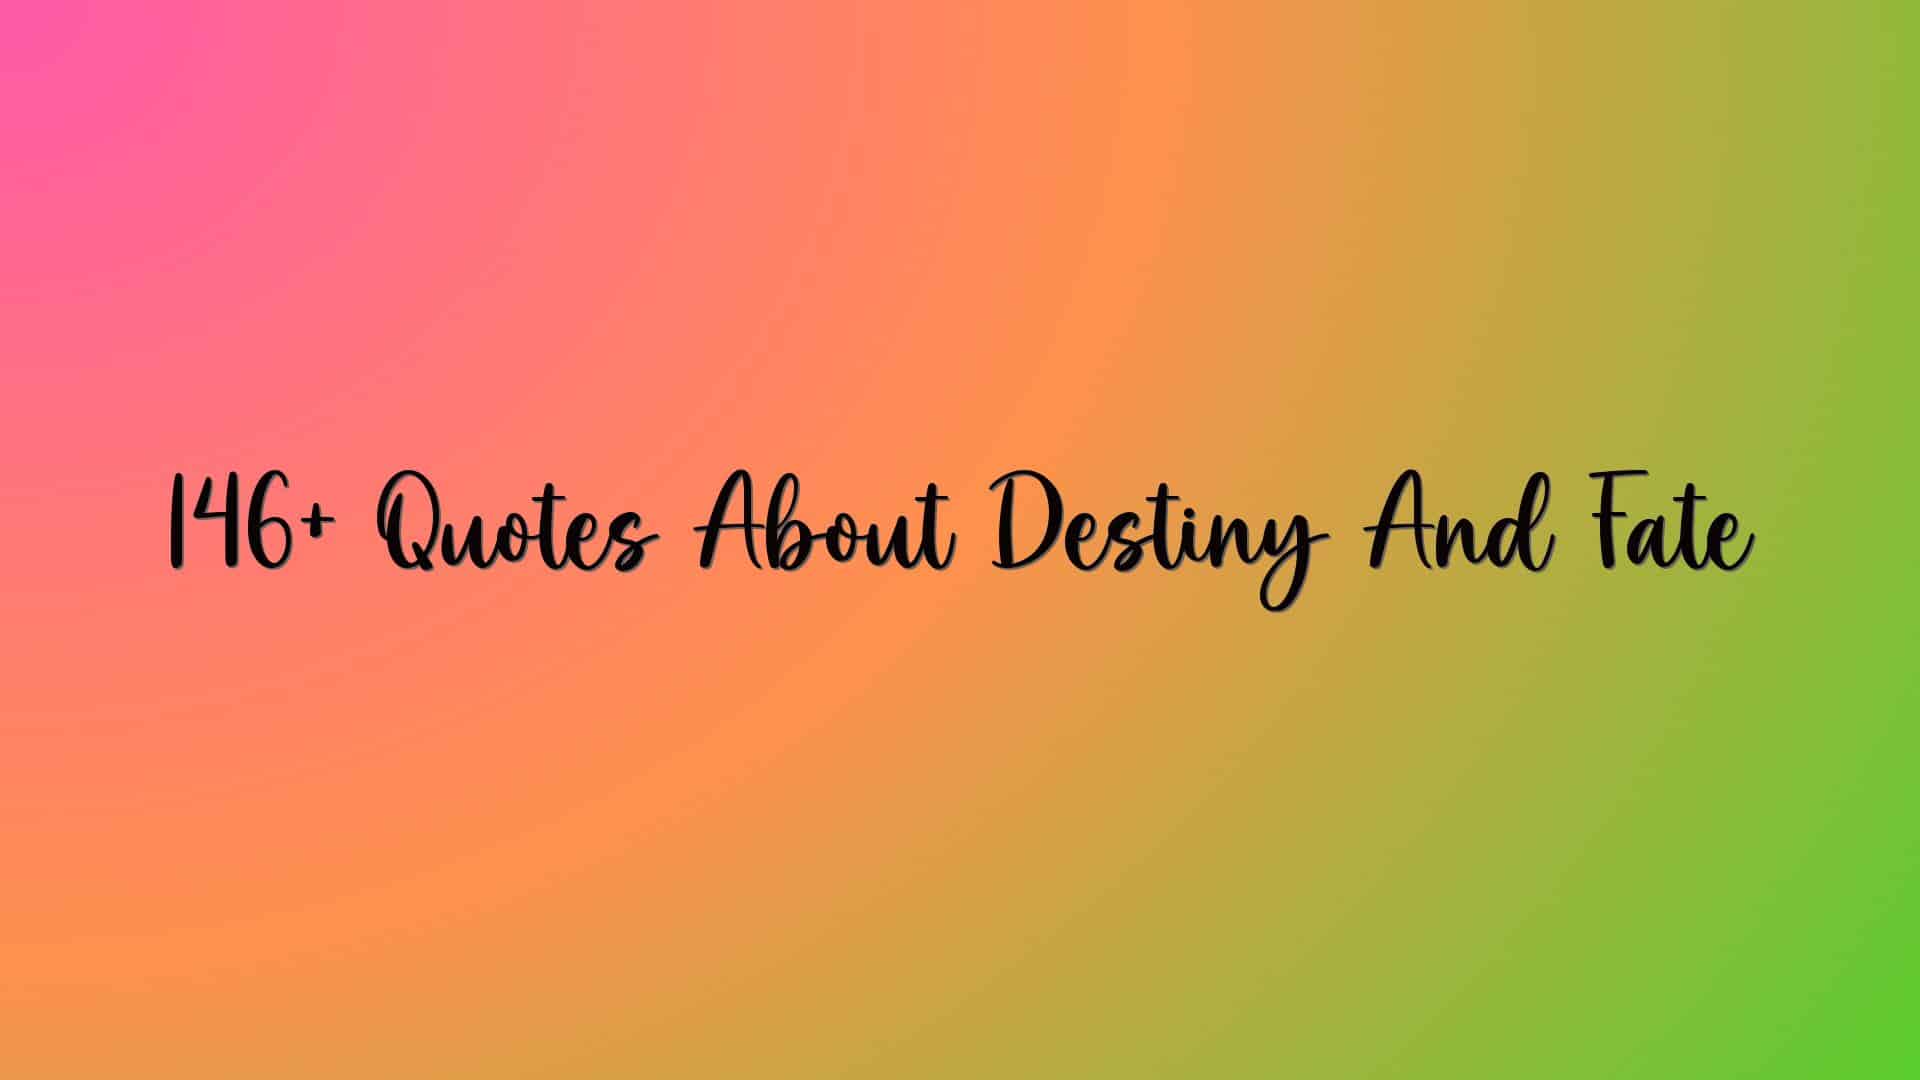 146+ Quotes About Destiny And Fate